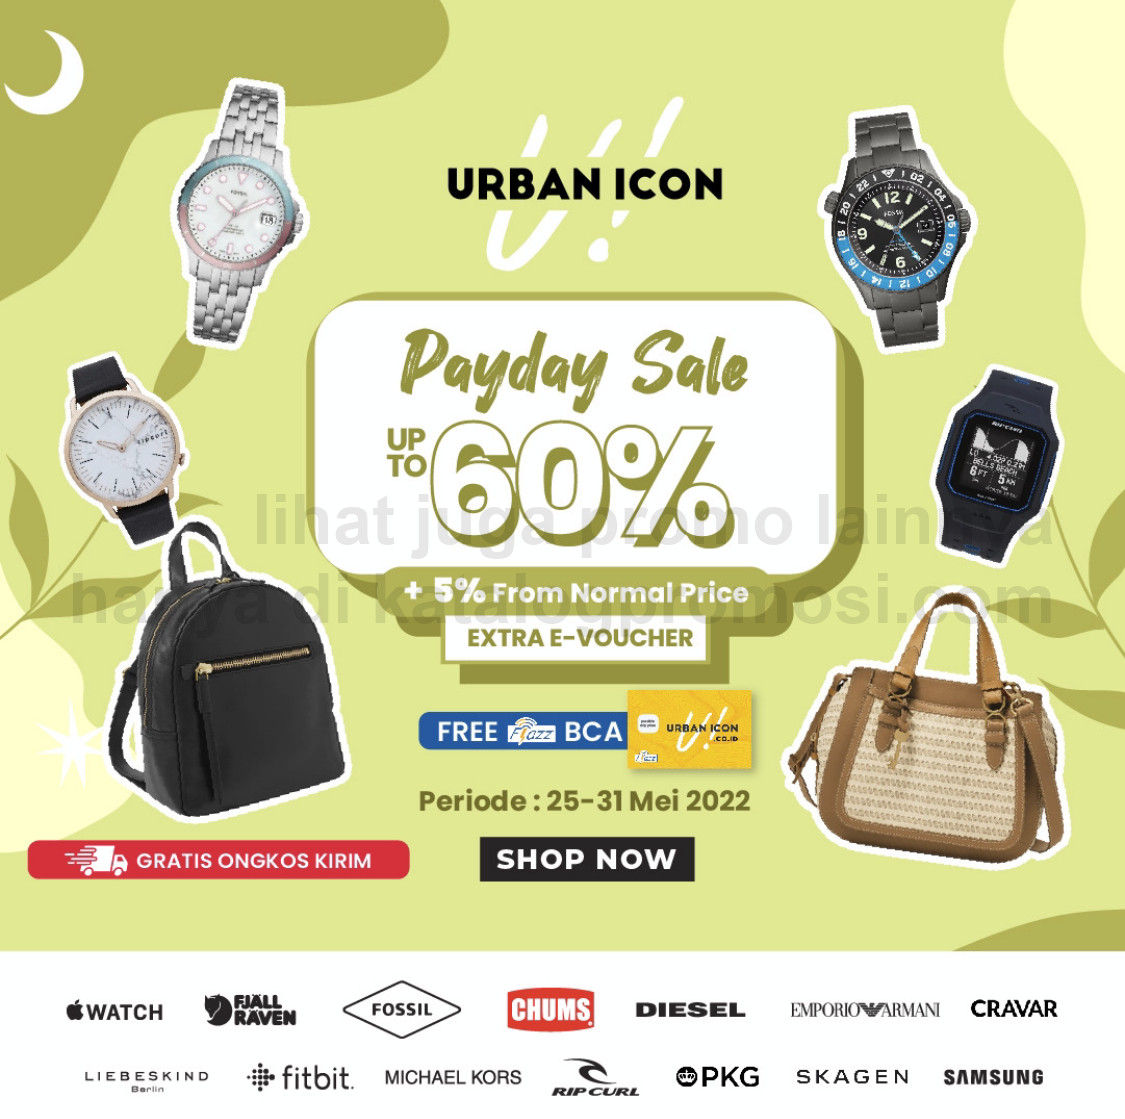 Promo Urban Icon Payday Sale - Discount up to 60% + 5%